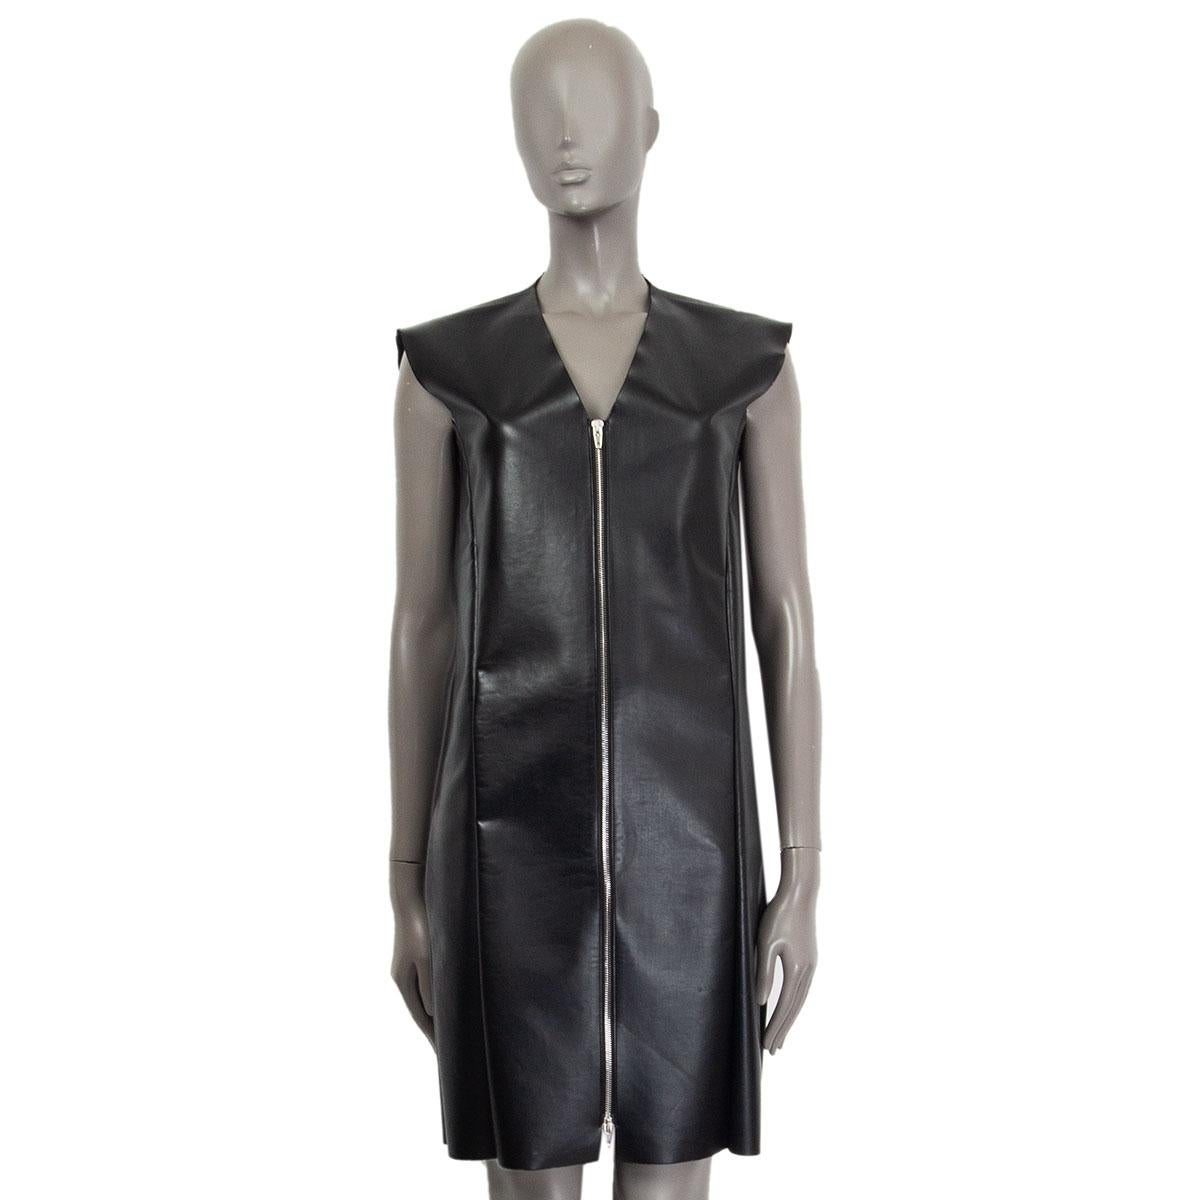 authentic Celine sleeveless faux leather shift dress in black polyurethane (100%) and inside in black polyamide (48%), polyester (34%) and elastane (18%). Closes with a zipper on the front and with slit pockets on the side. Has small scratches at